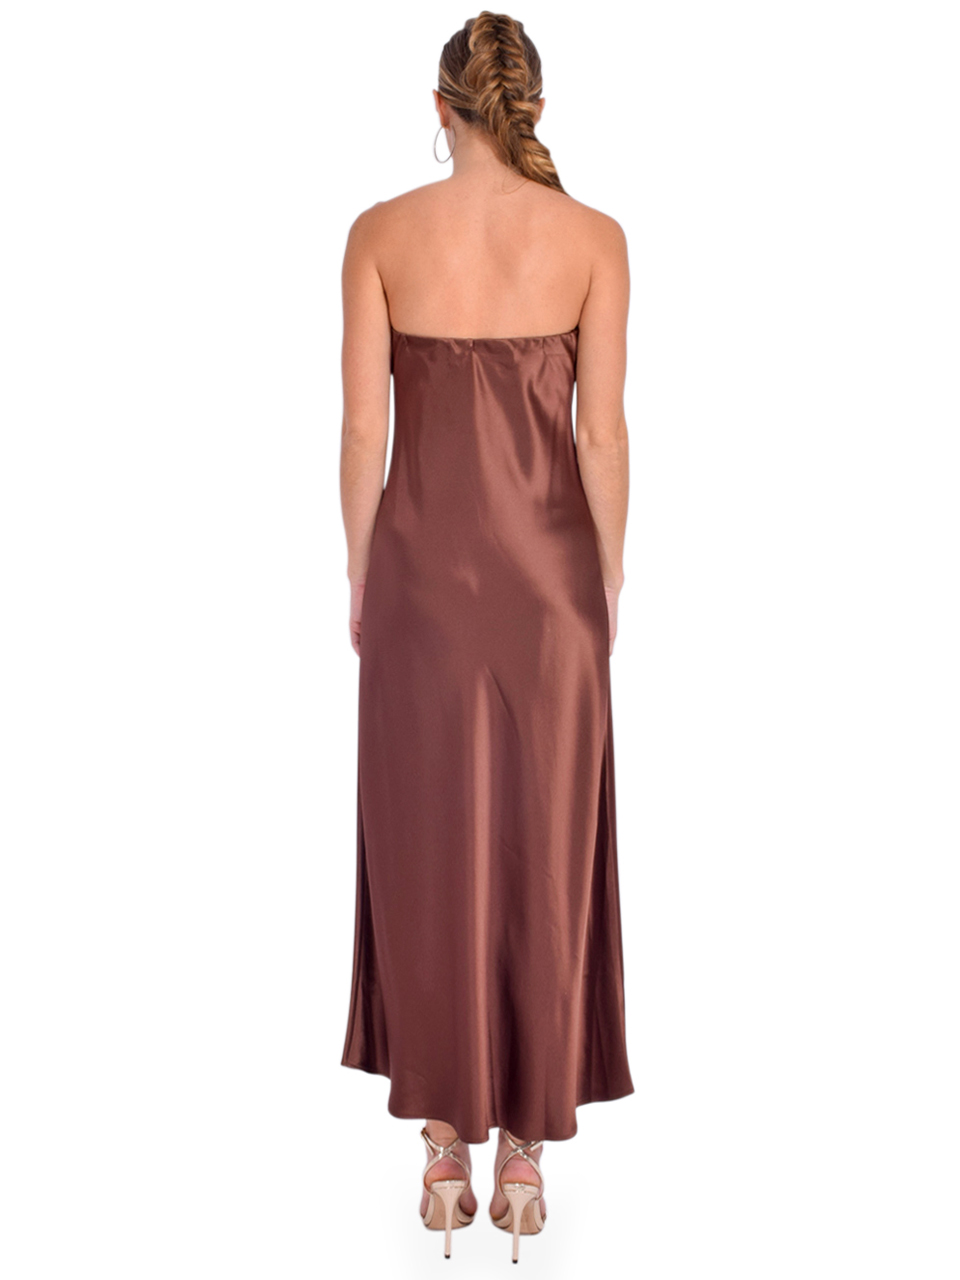 CAMI NYC Noelle Strapless Dress in Coconut Brown Back View 